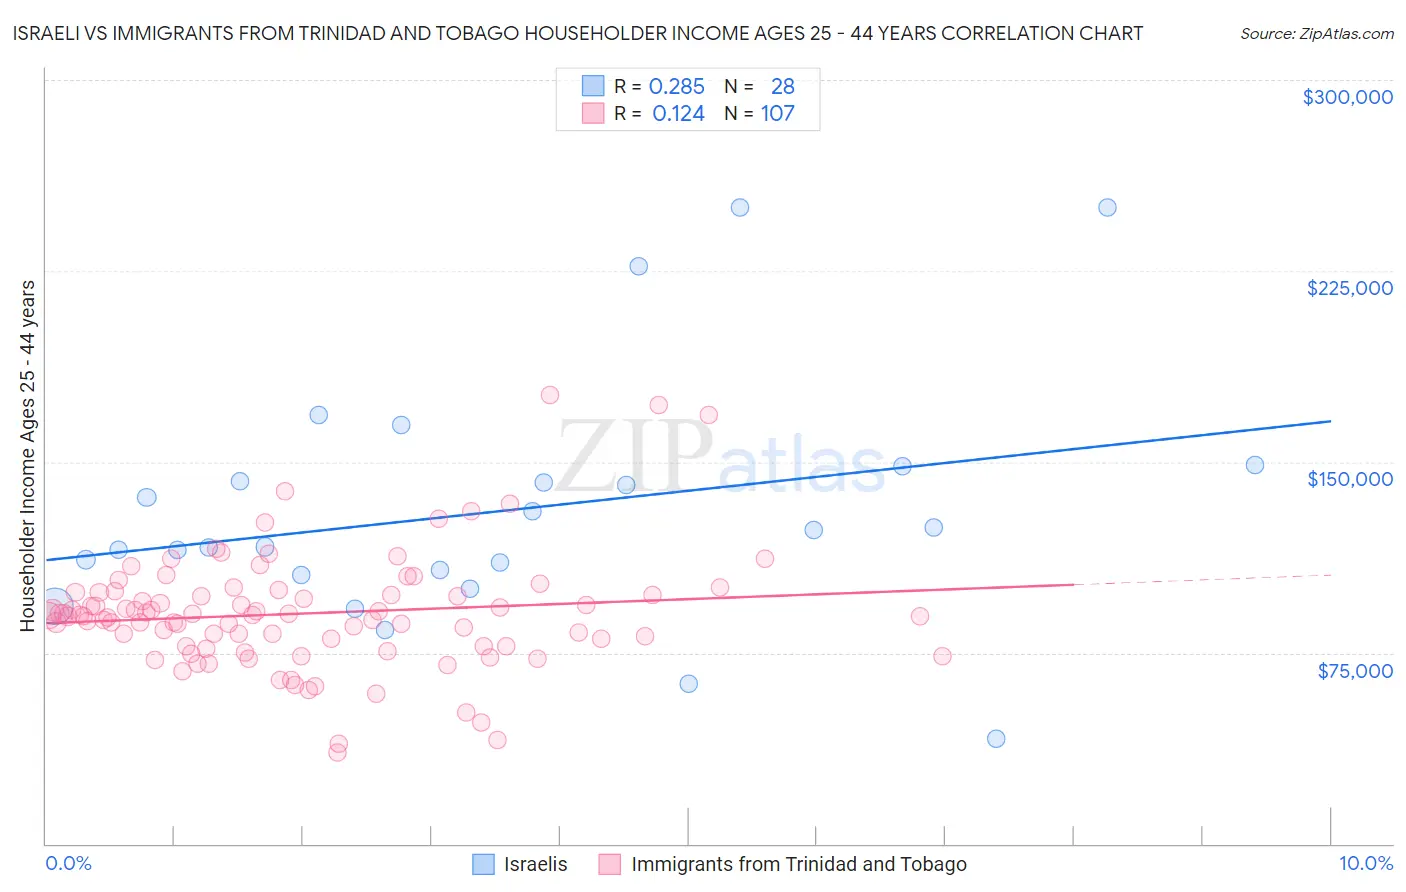 Israeli vs Immigrants from Trinidad and Tobago Householder Income Ages 25 - 44 years